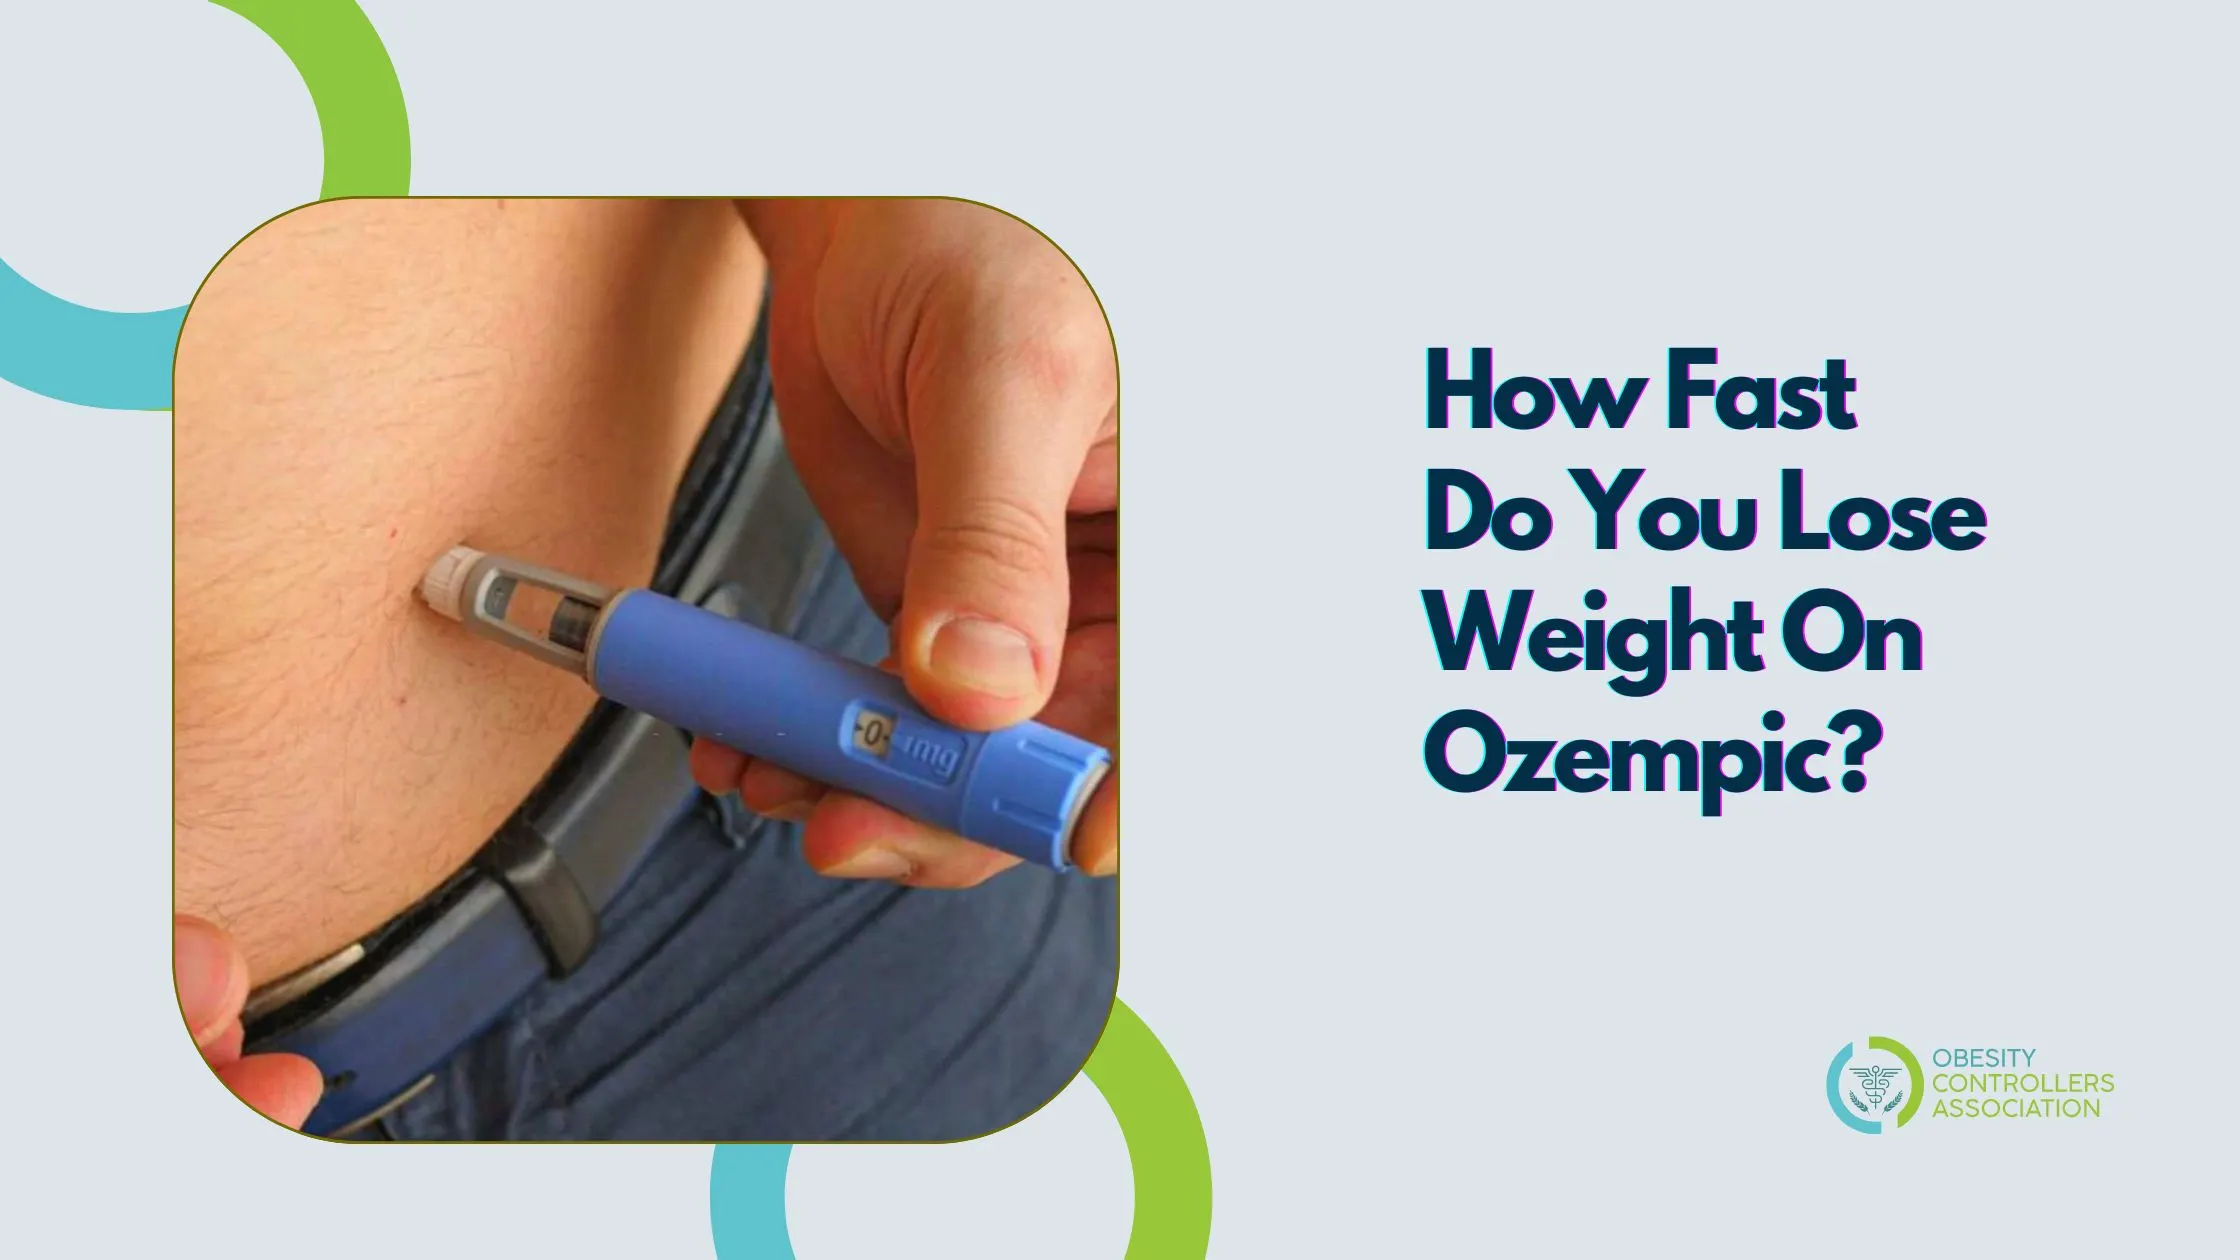 How Fast Do You Lose Weight On Ozempic